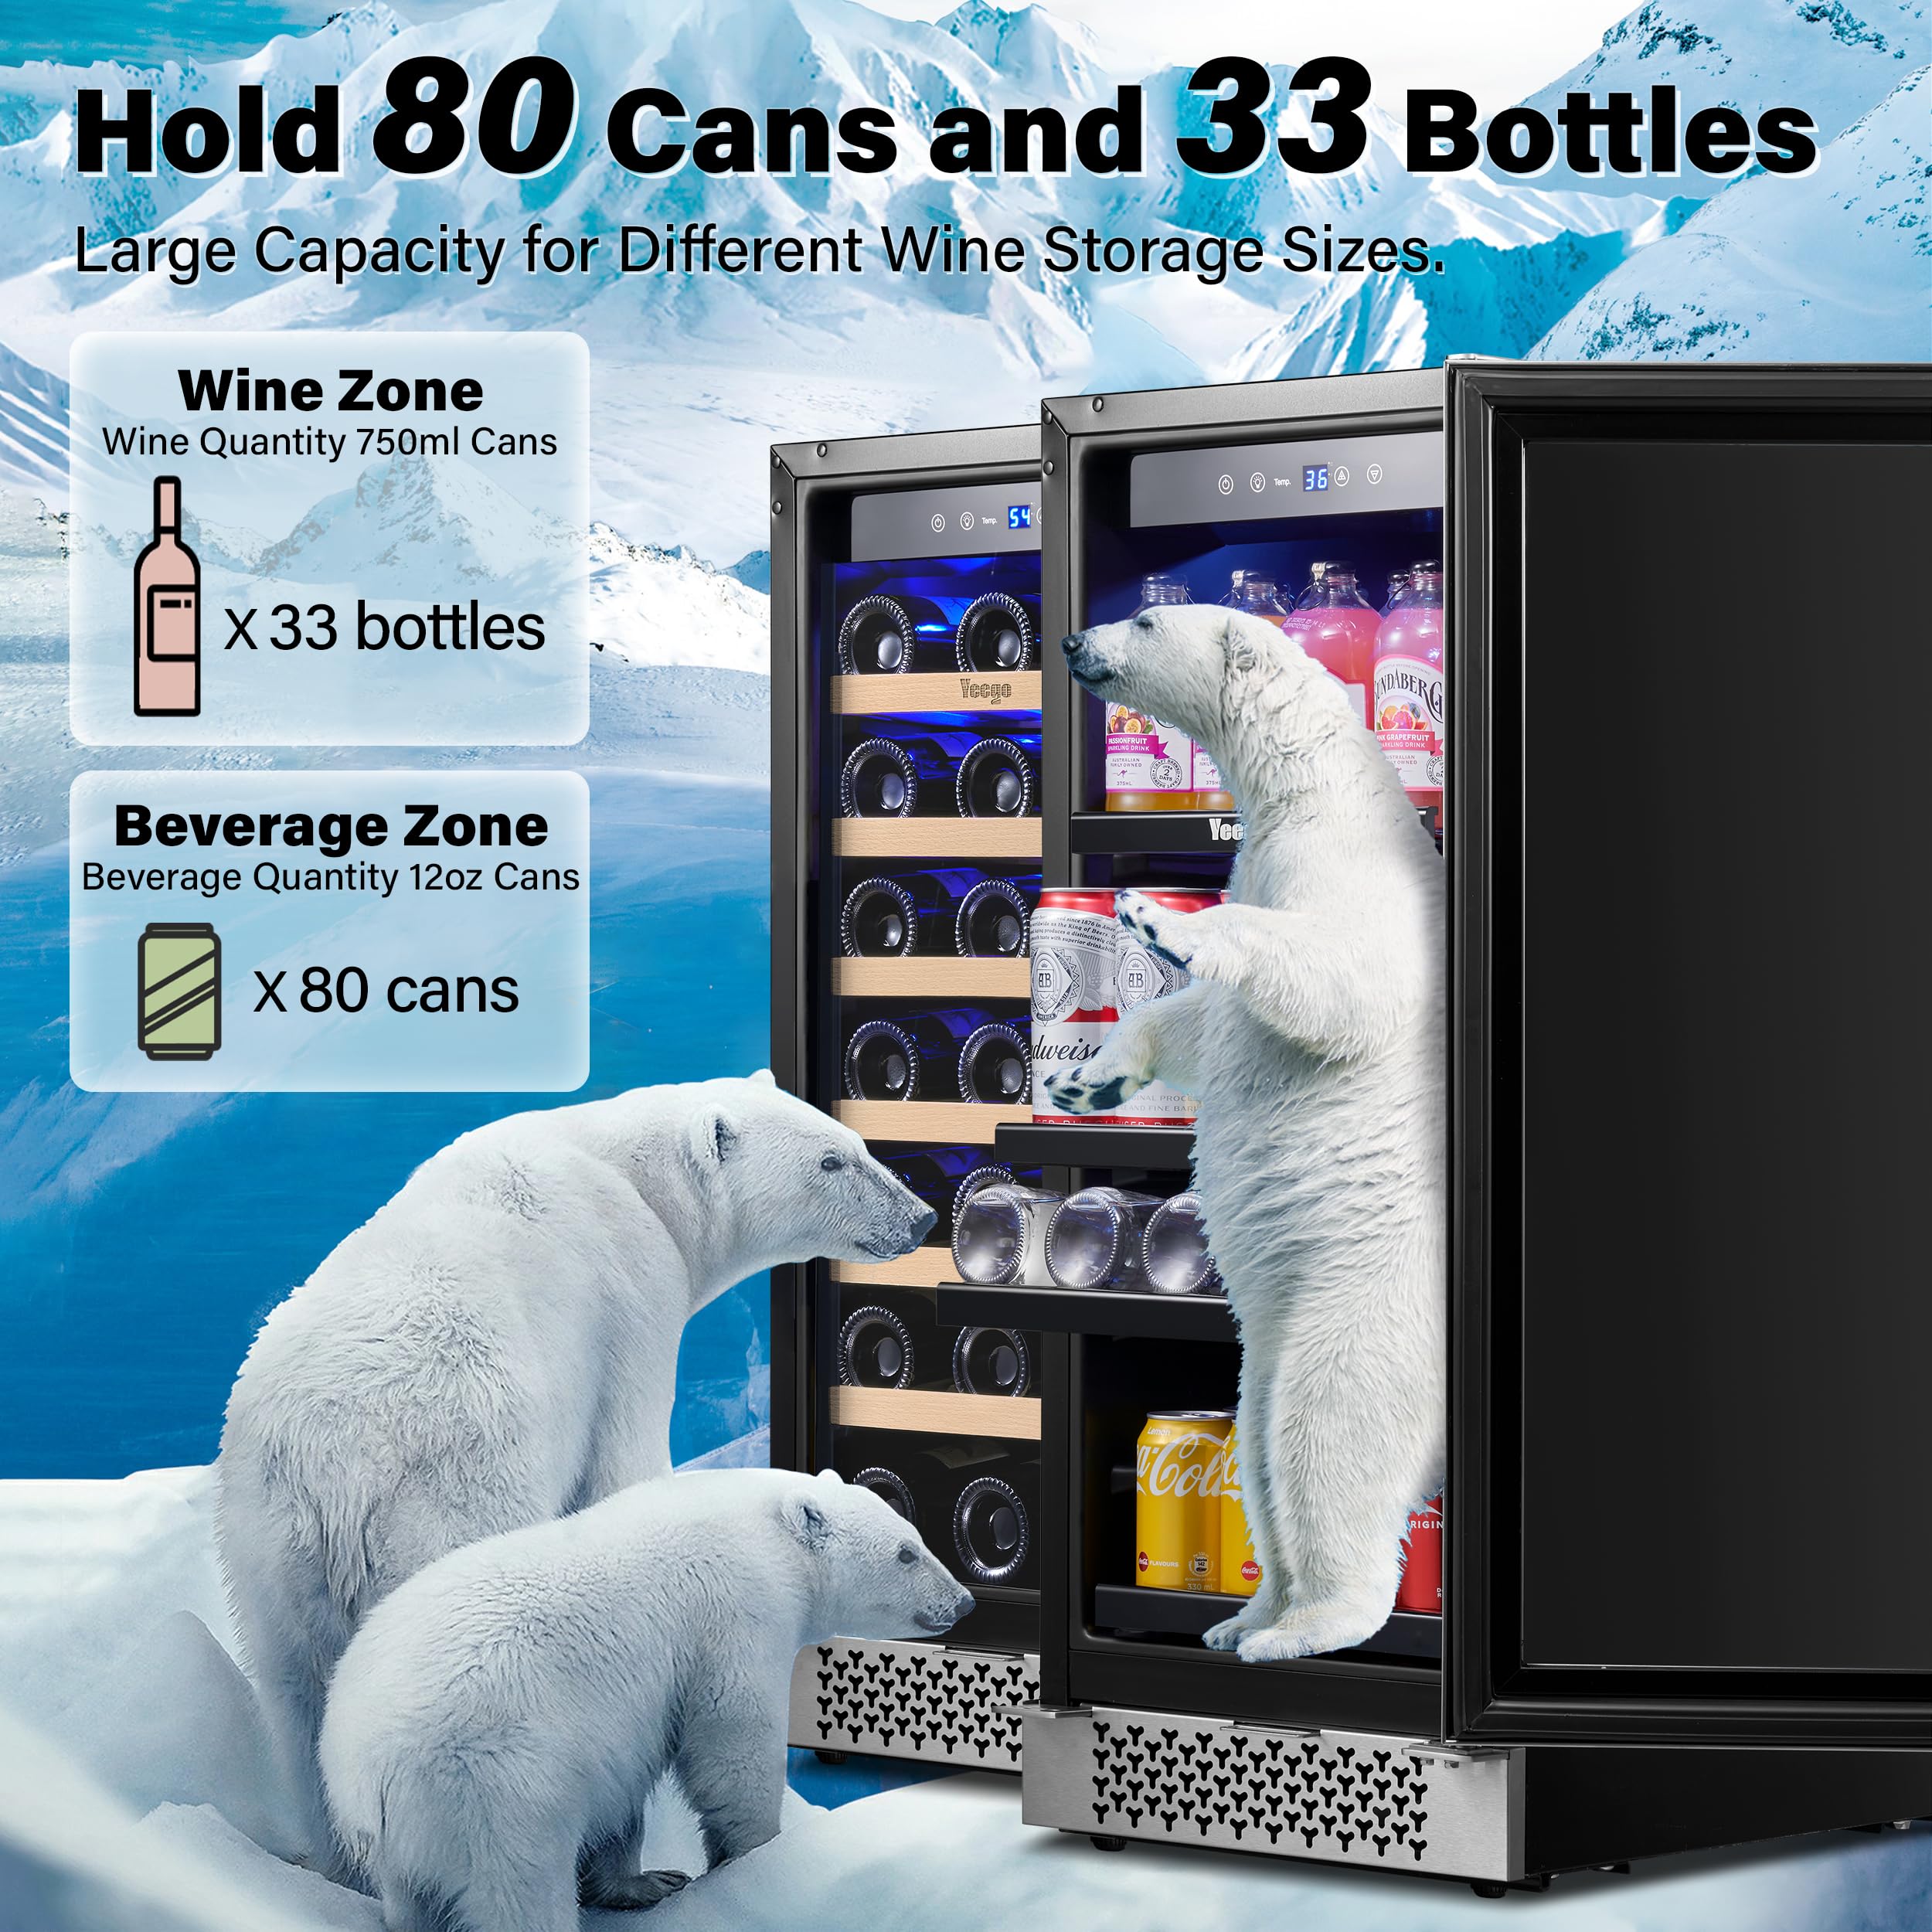 Yeego 30 inch Wine Fridge, Two 15" Wine Coolers Side-by-Side Refrigerators Freestanding Wine Cooler, Hold 33 Bottles and 80 cans